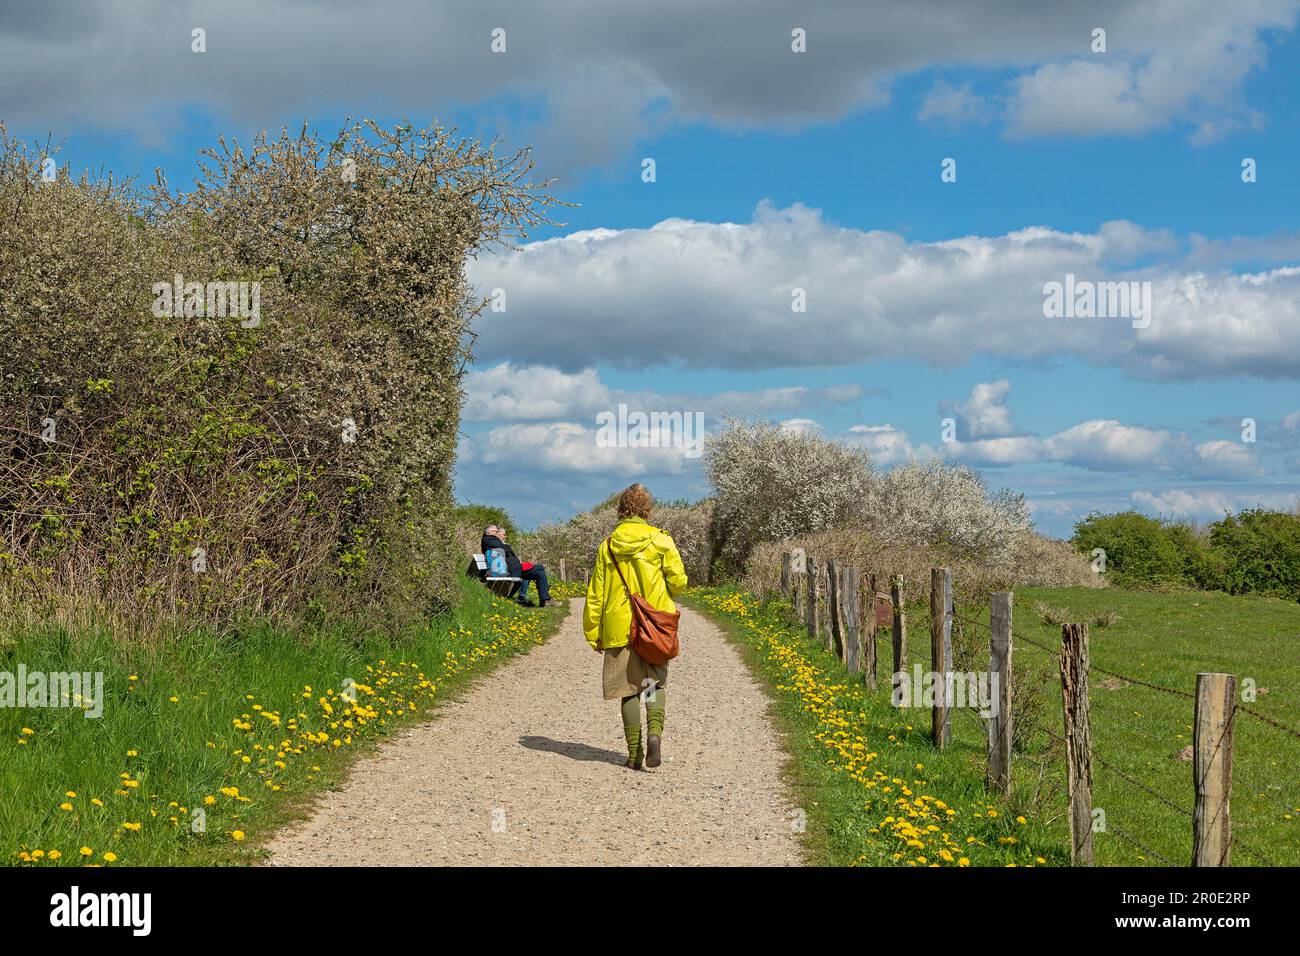 Clouds, hiking path, blackthorne hedge, woman, Holnis Peninsula, Schleswig-Holstein, Germany Stock Photo